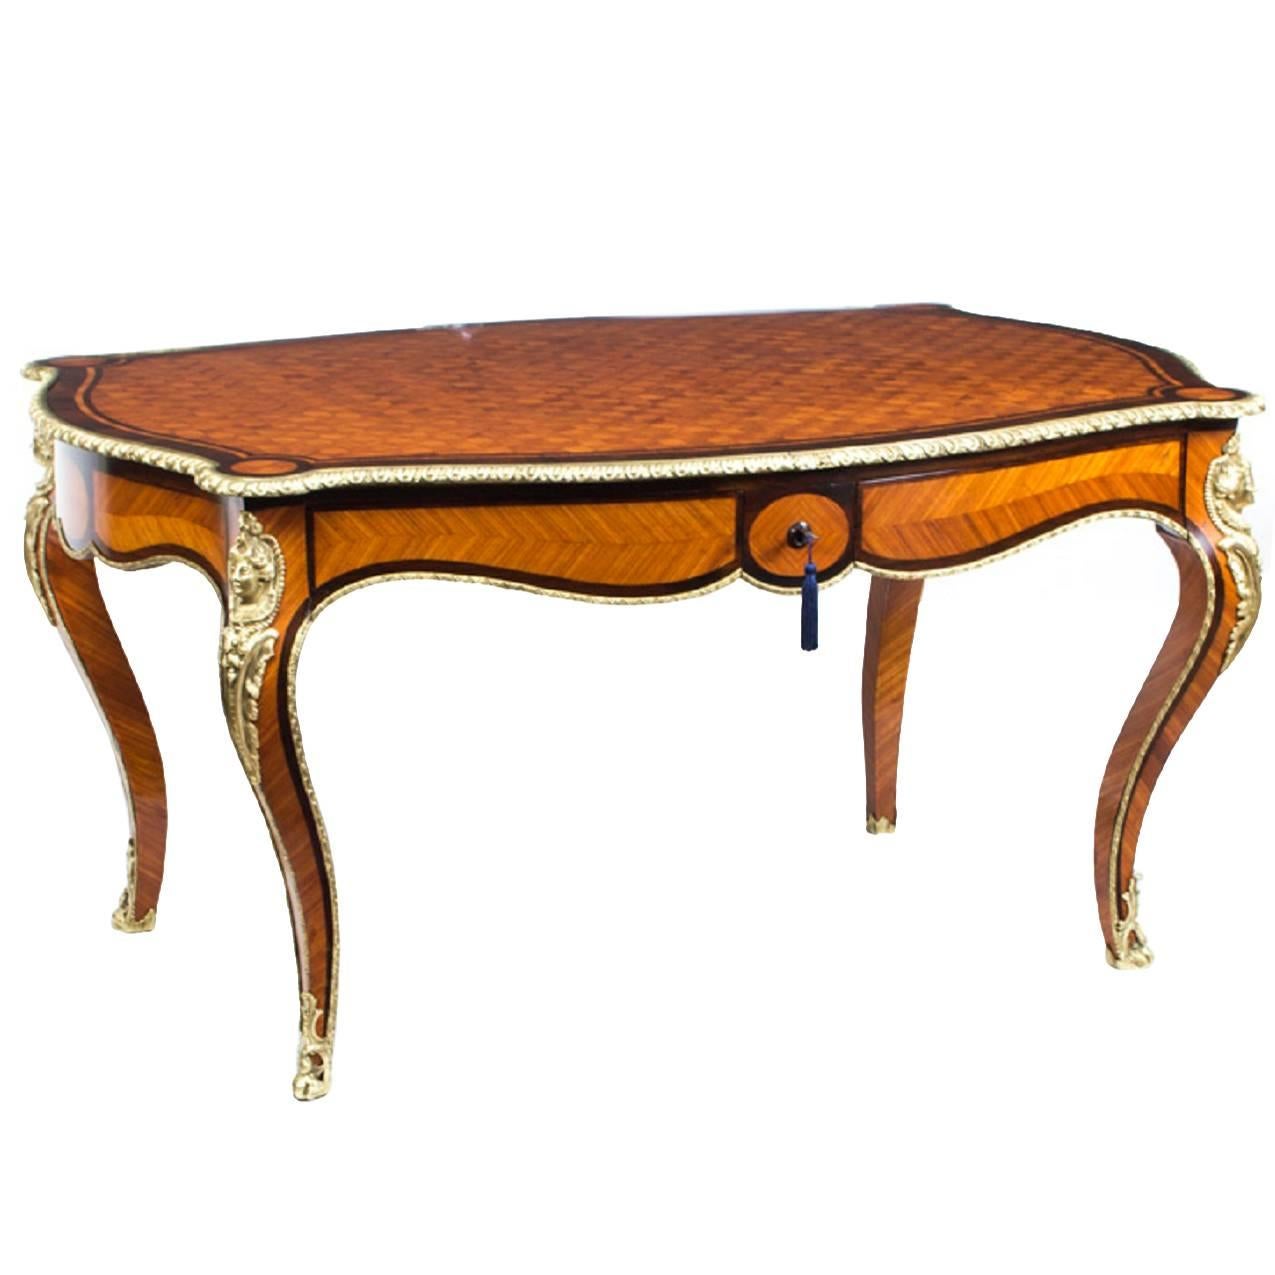 19th Century French Bureau Plat Parquetry Writing Table